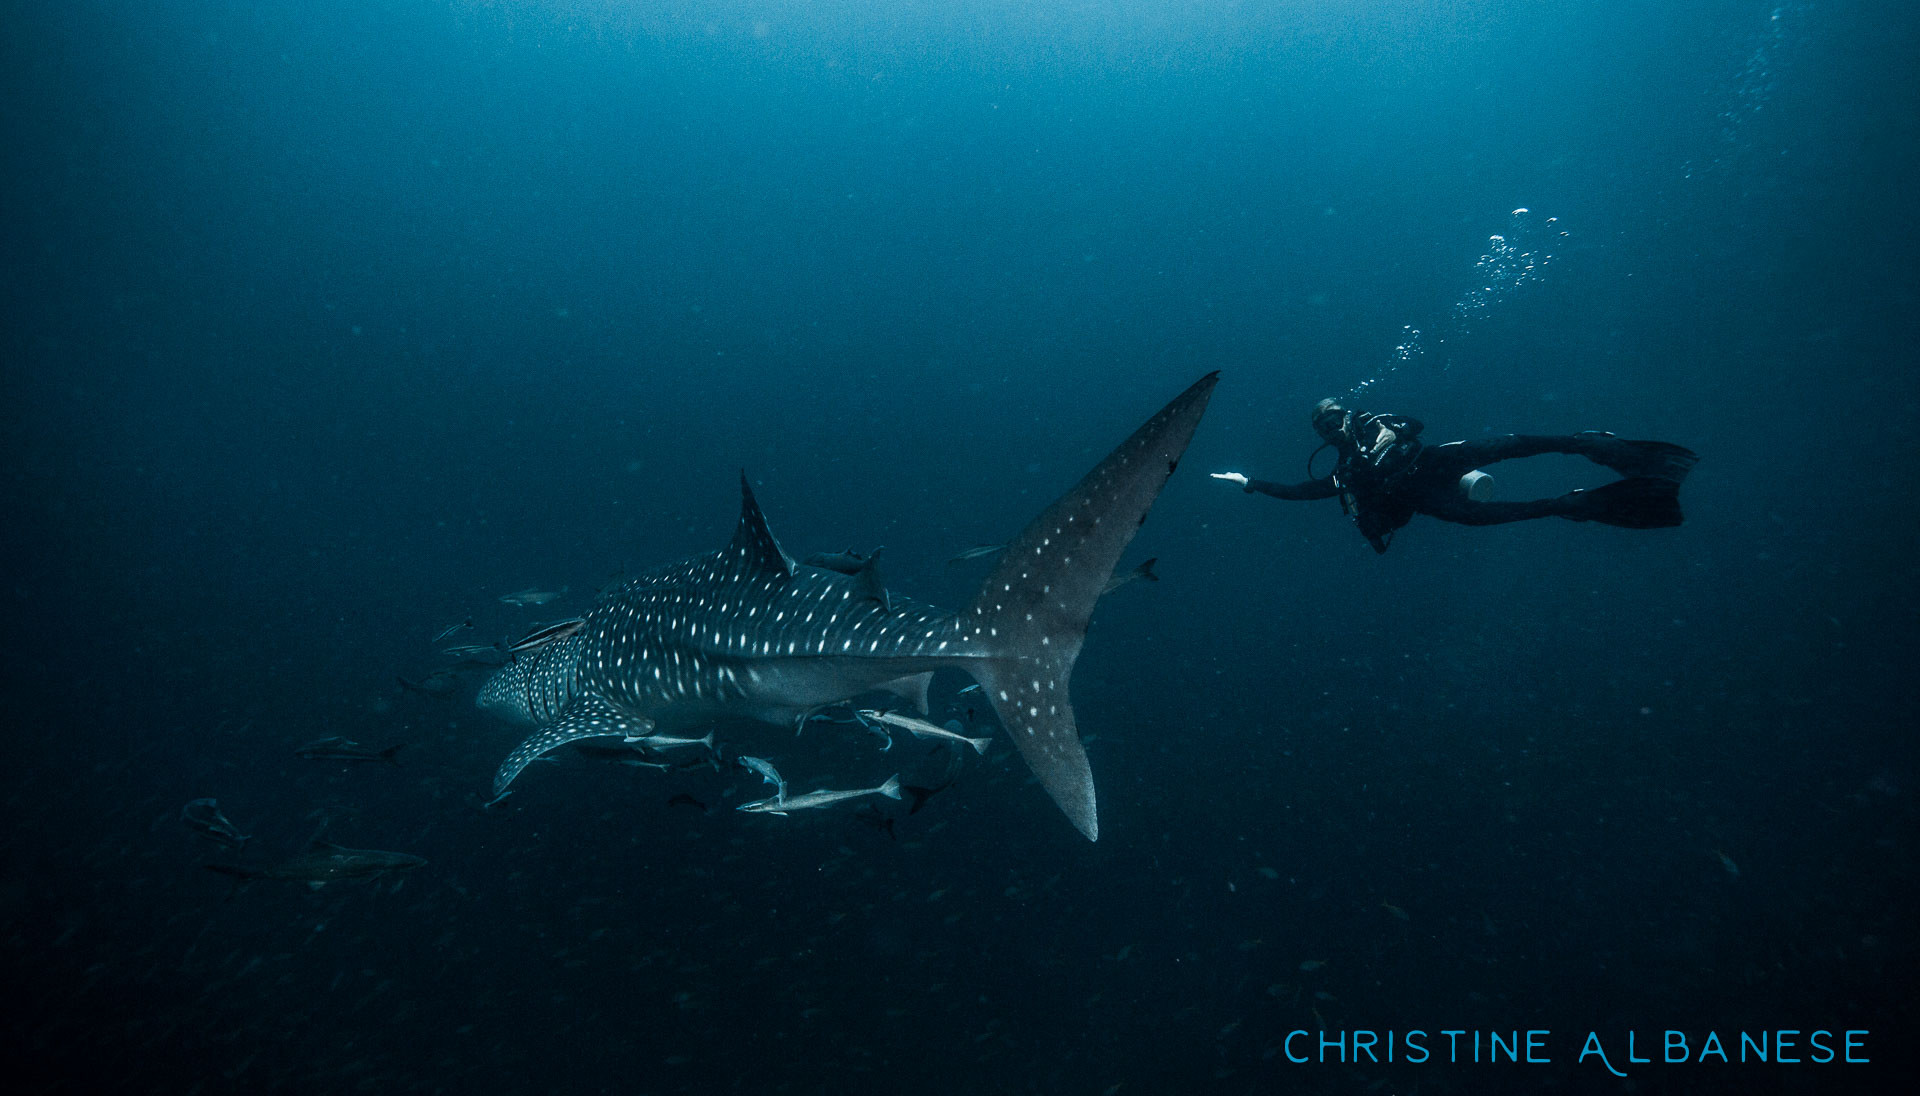 I was a lucky girl in 2015 and saw 5 whale sharks over the course of the year (AND had my camera for each encounter)! This was the last one I saw in November and Josh is such a lucky guy to have gotten himself a photo with one! He was so happy he cried 😂

When will I get a photo of myself with such an awesome creature?! 😤 #photographerproblems